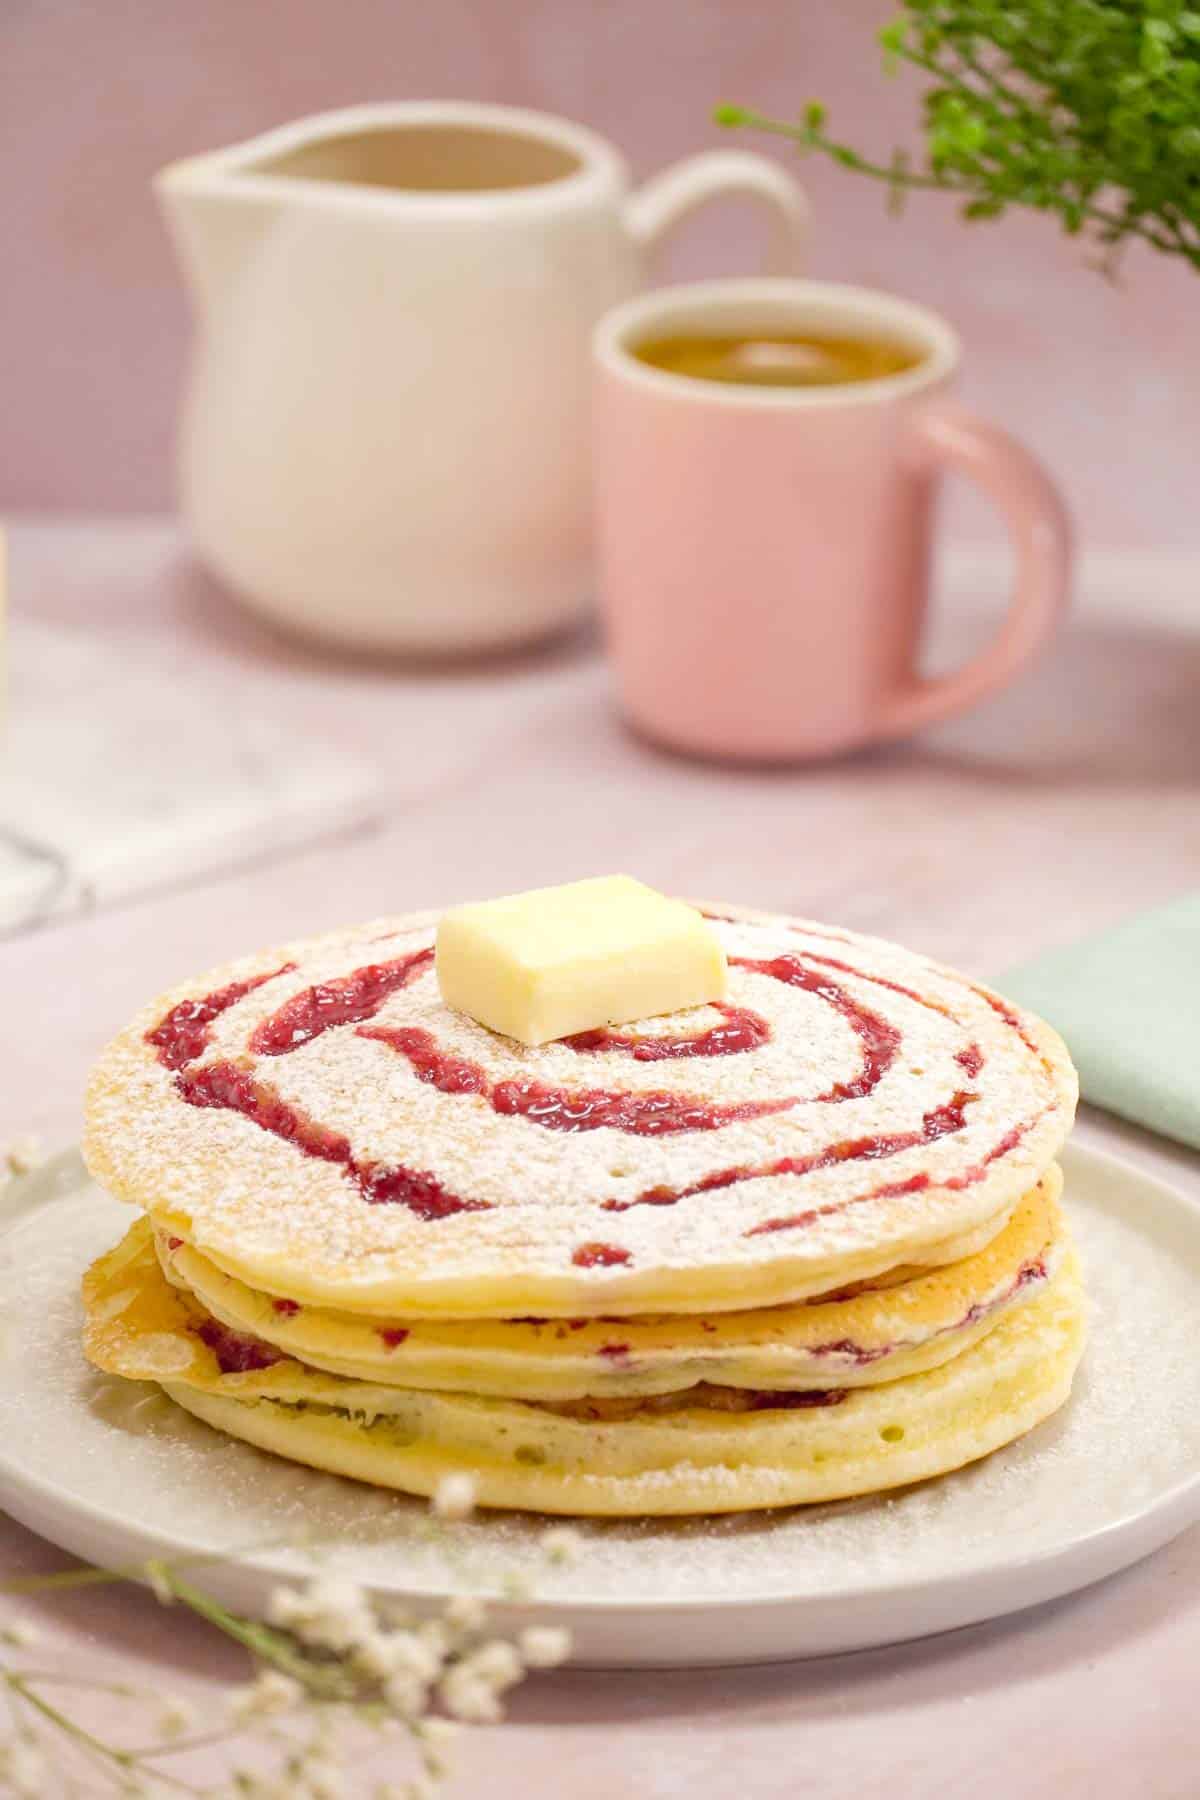 Three raspberry swirl pancakes on a white plate. There are a decorative mug and jar in the background.